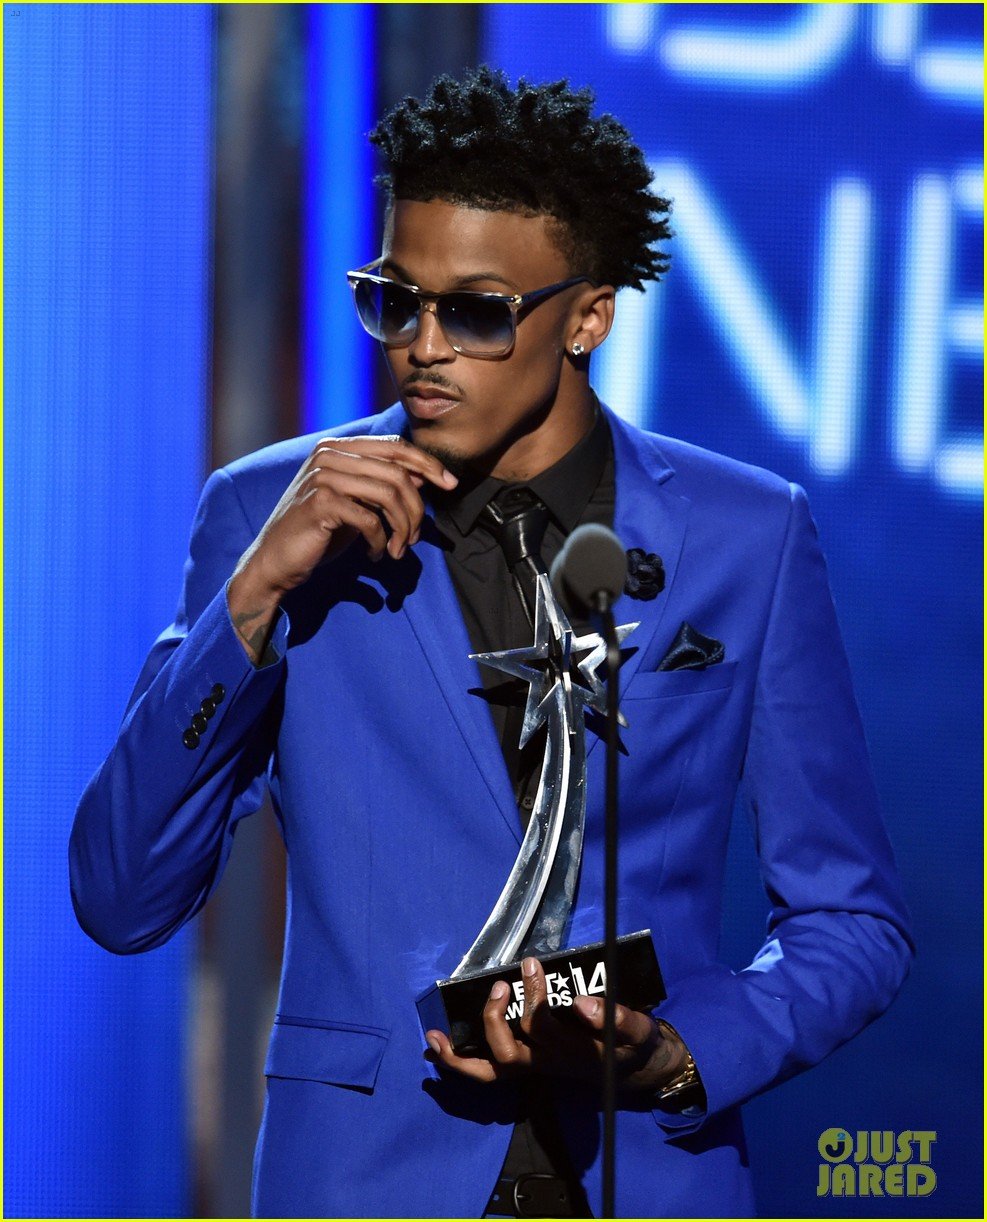 How To Do The August Alsina Bet Hairstyle